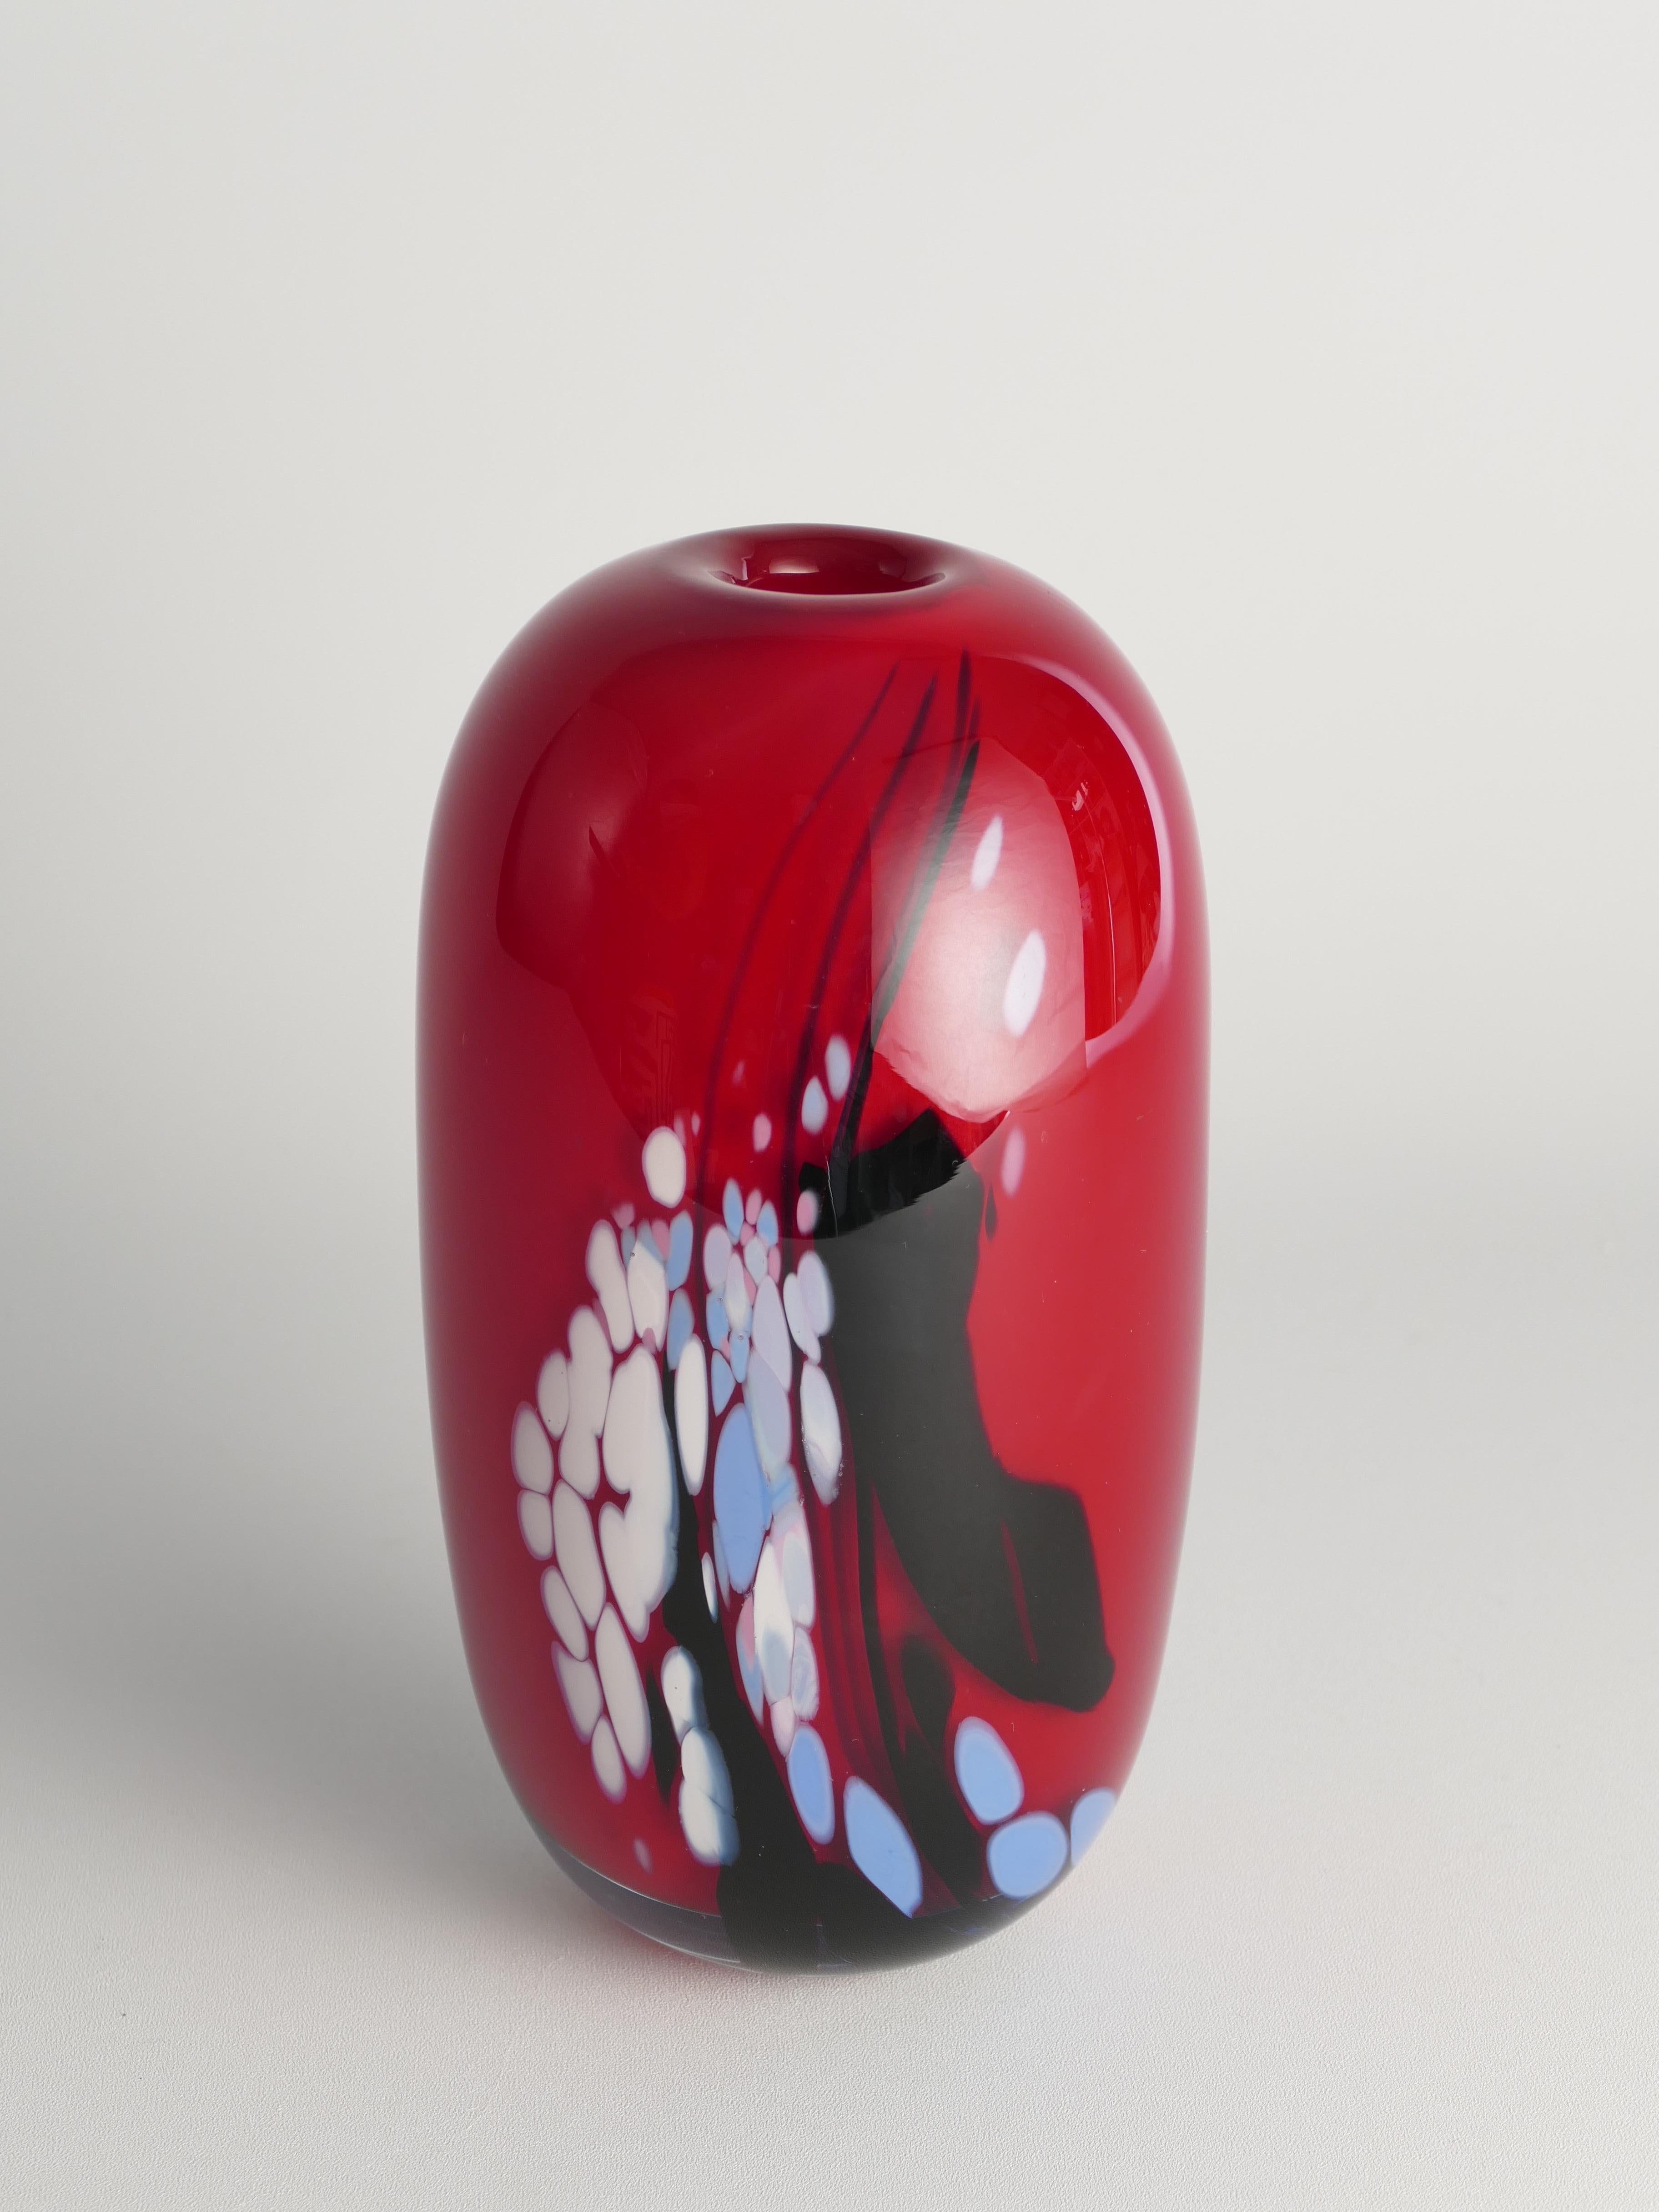 Unique Cherry Red Art Glass Vase by Mikael Axenbrant, Sweden 1990 For Sale 12